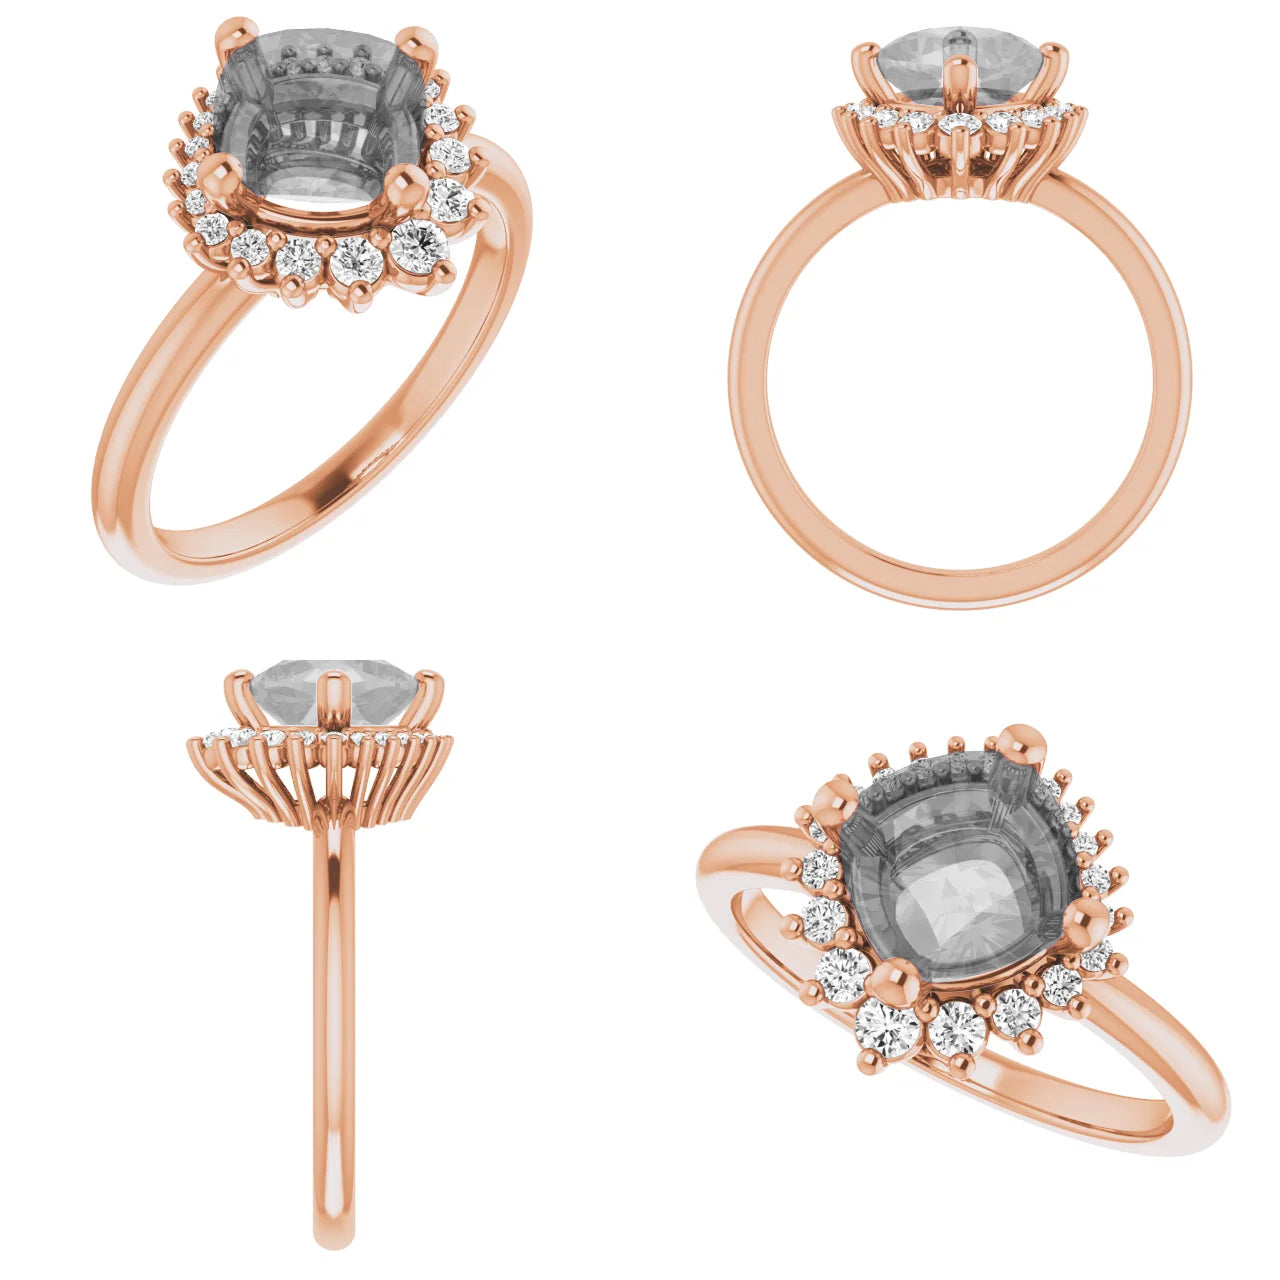 Eleanor Setting - Midwinter Co. Alternative Bridal Rings and Modern Fine Jewelry